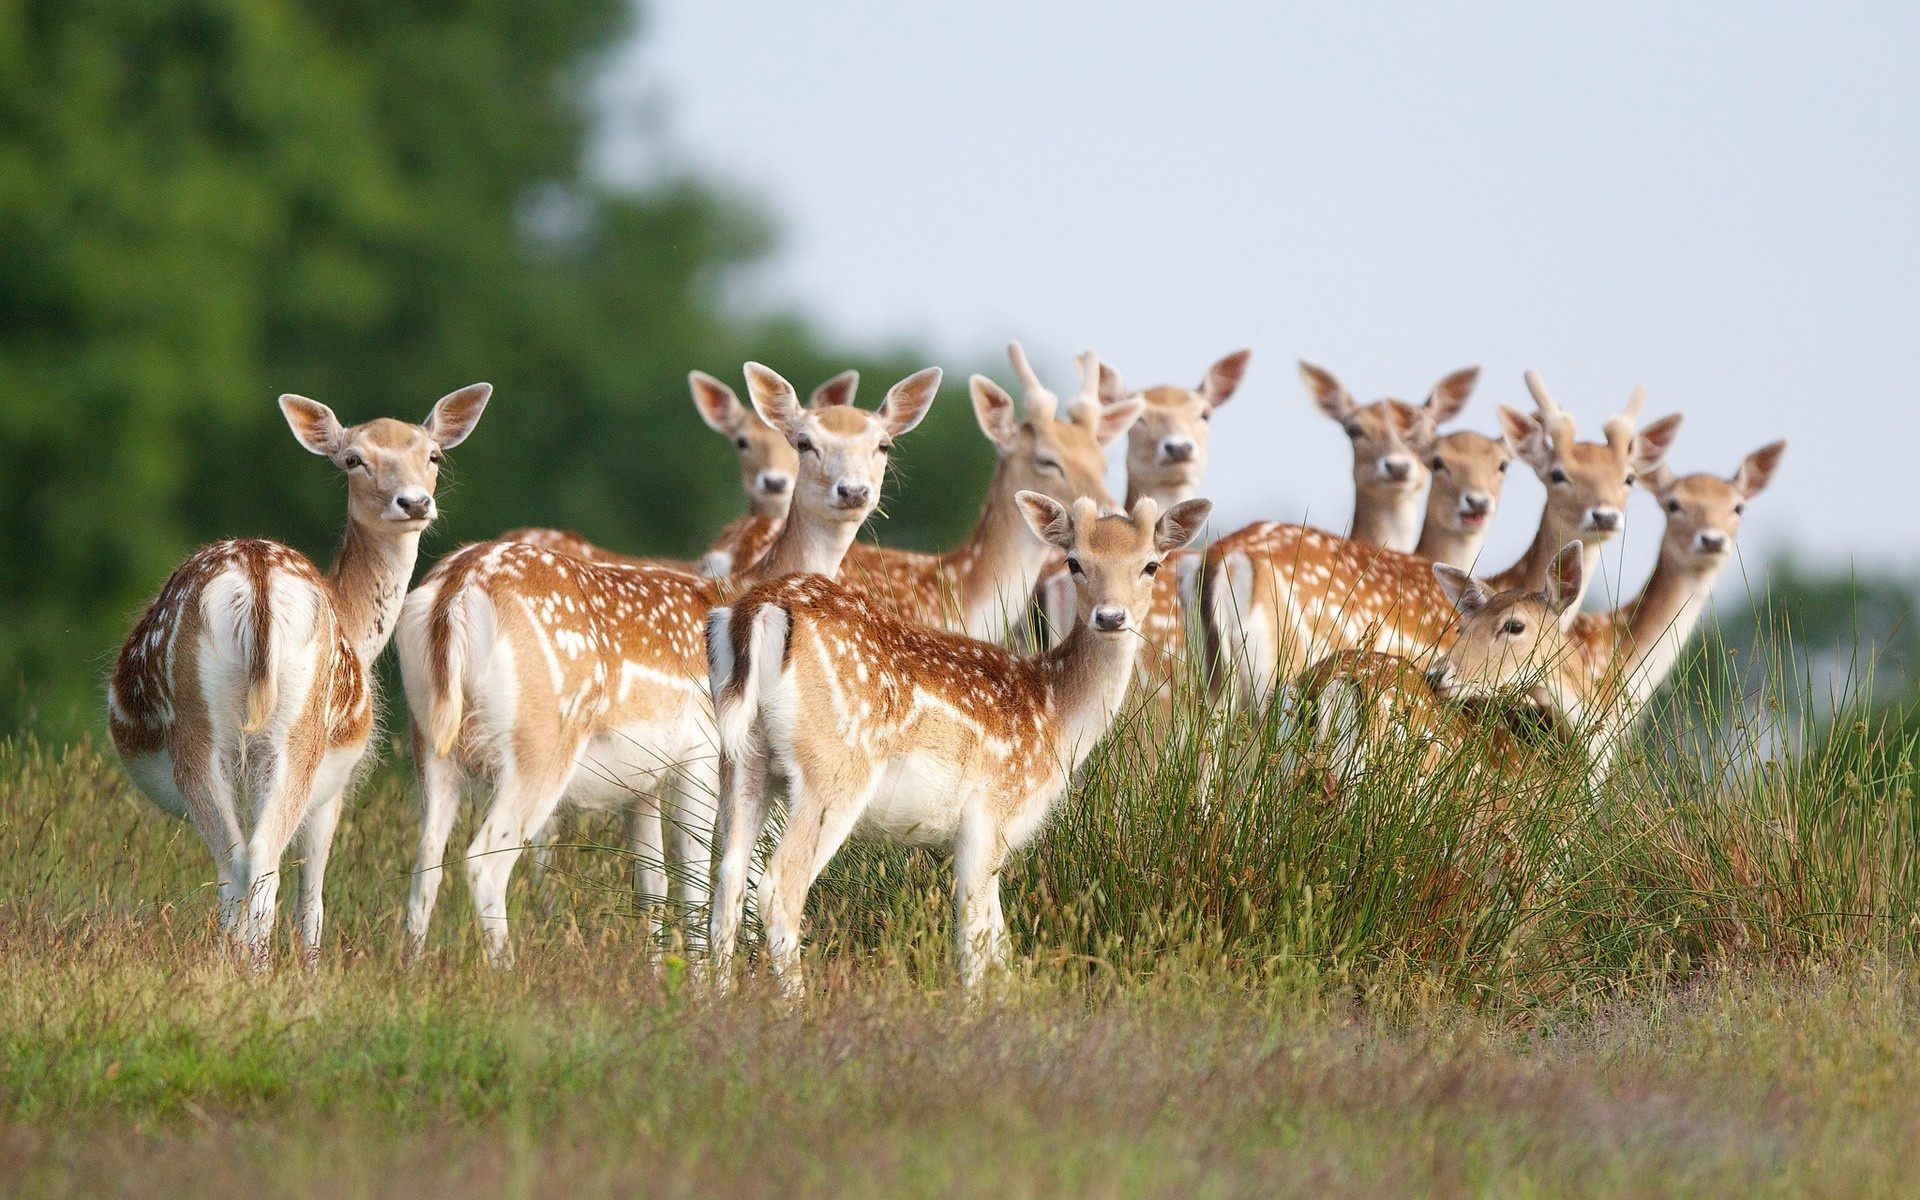 What is a collection of deer called?